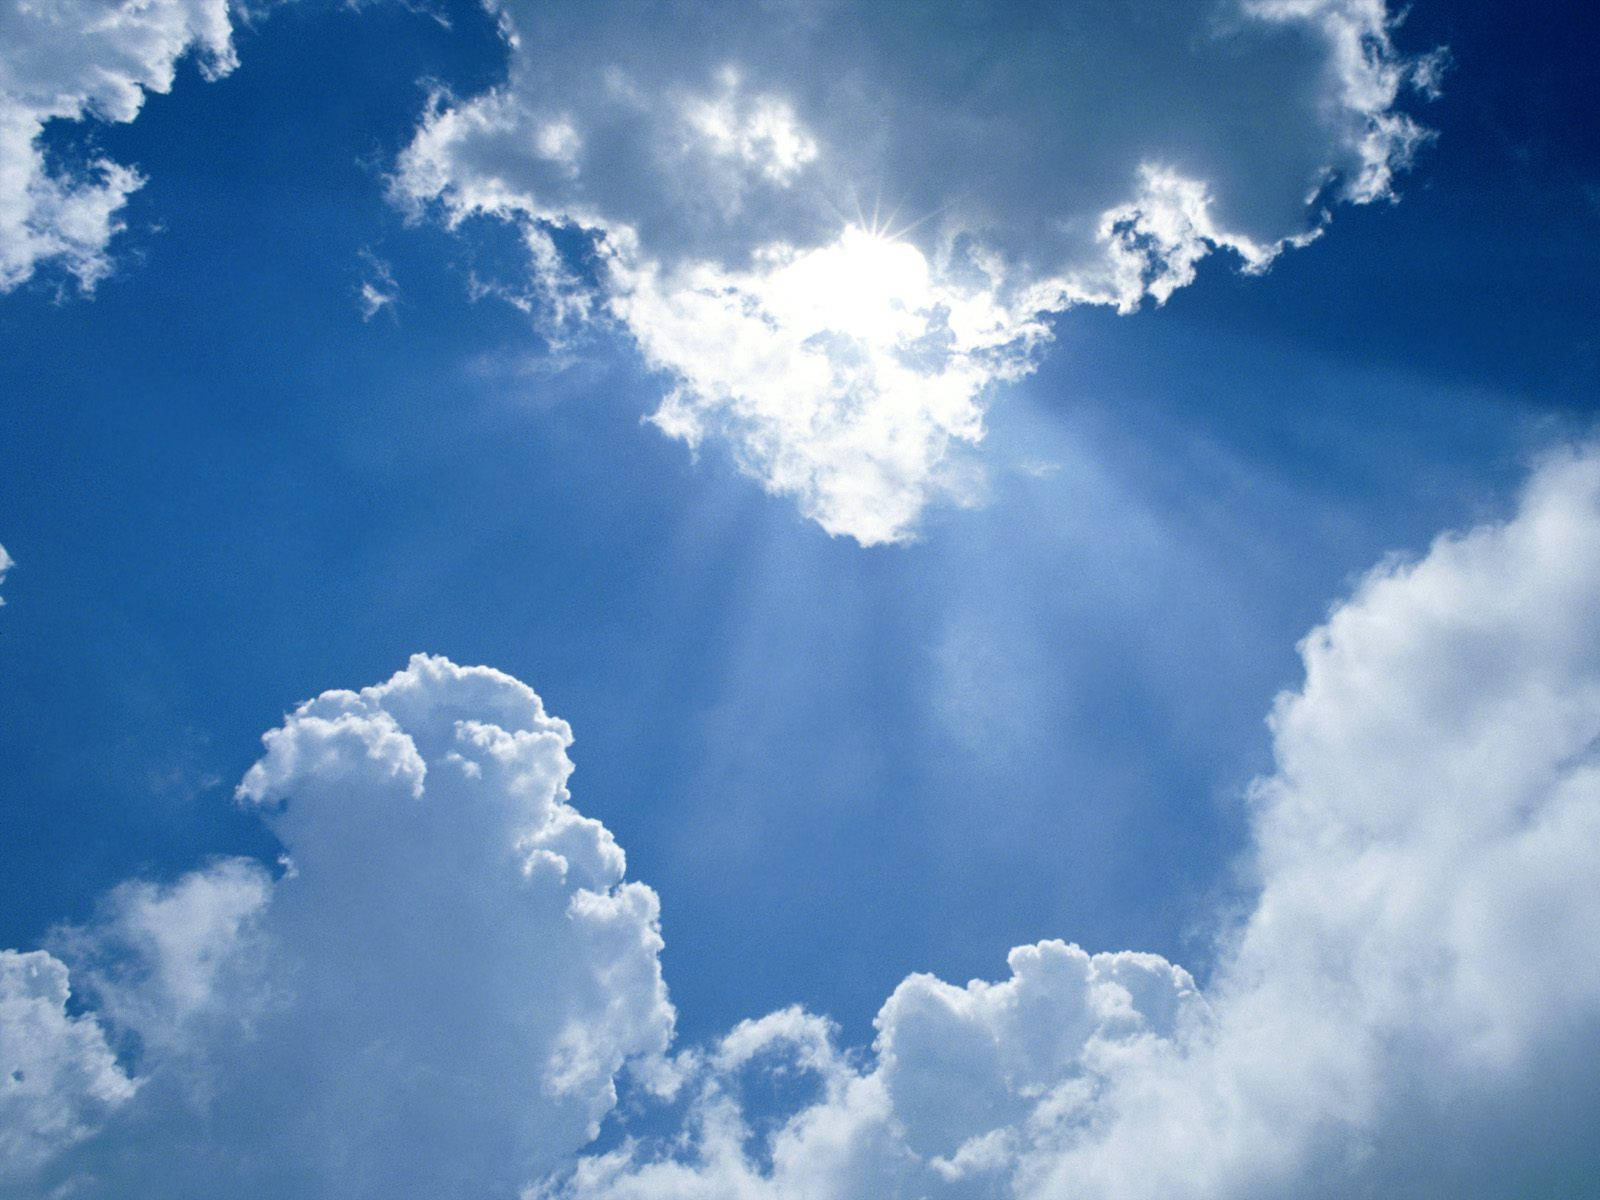 A Blue Sky With Clouds And Sun Shining Through